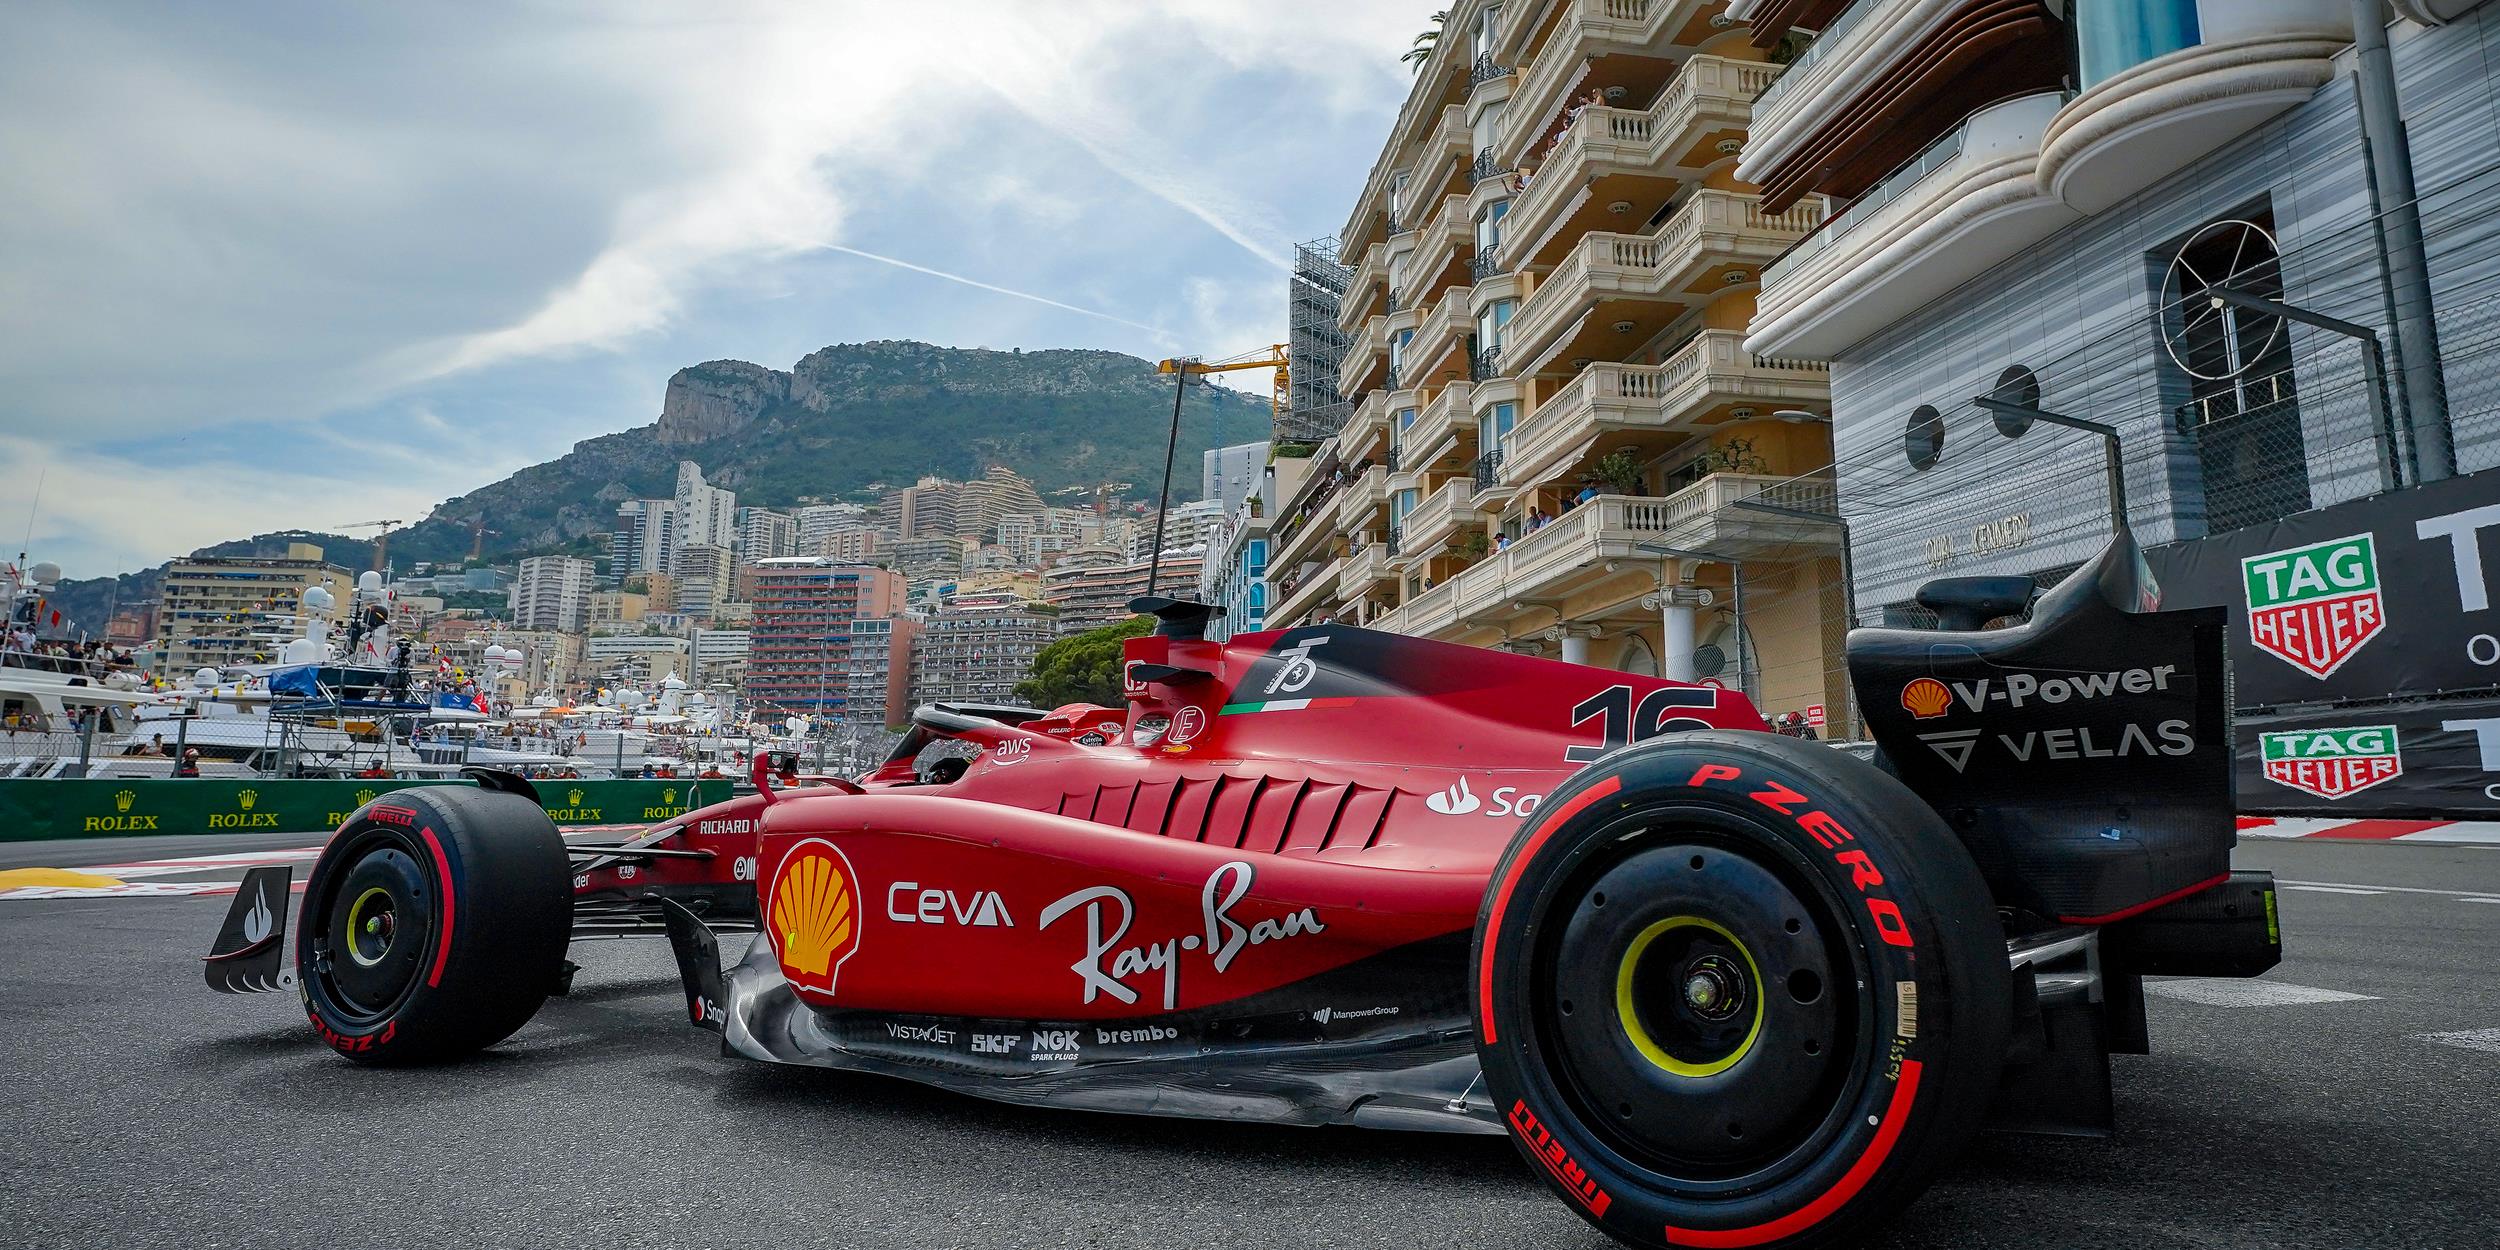 Formula 1 GP Monte Carlo: Starting Time, Broadcast, Schedule, Qualifying & Circuit